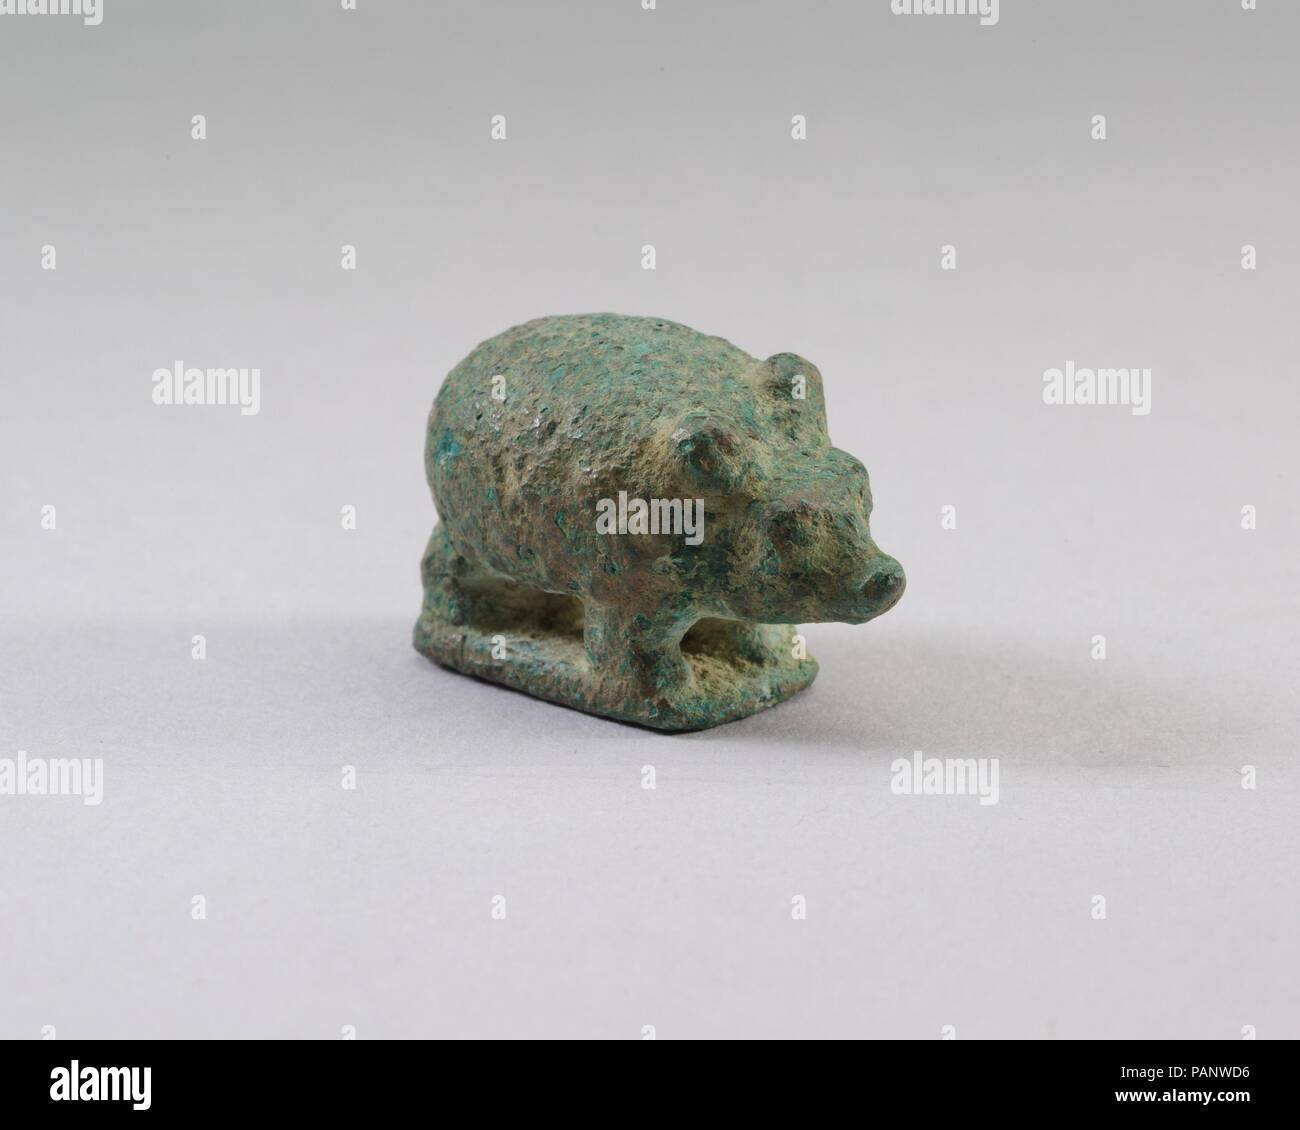 Hedgehog. Dimensions: h. 1.9 cm (3/4 in.) × l. 3.2 cm (1 1/4 in.)   weight 41.9 grams (1.478 oz.). Date: 664-30 B.C..  Hedgehogs may have been noted because of their ability to hiberate during food scarcity. The disappearance of the animals for long periods and their later reemergence may have been connected with rebirth. Museum: Metropolitan Museum of Art, New York, USA. Stock Photo